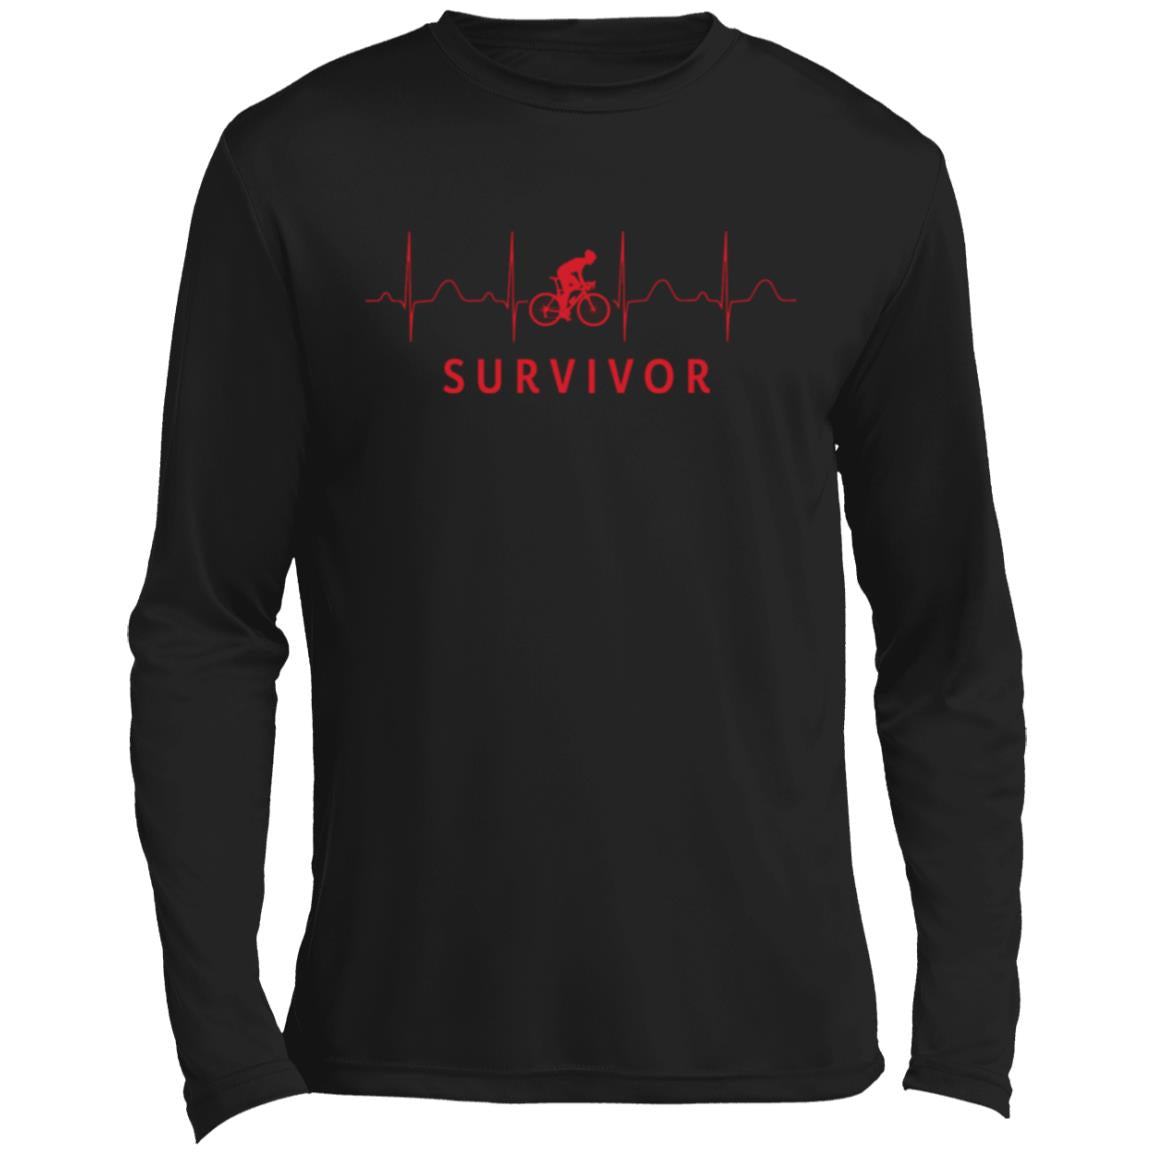 Black long-sleeve tee with SURVIVOR text along with a biker icon with EKG lines behind